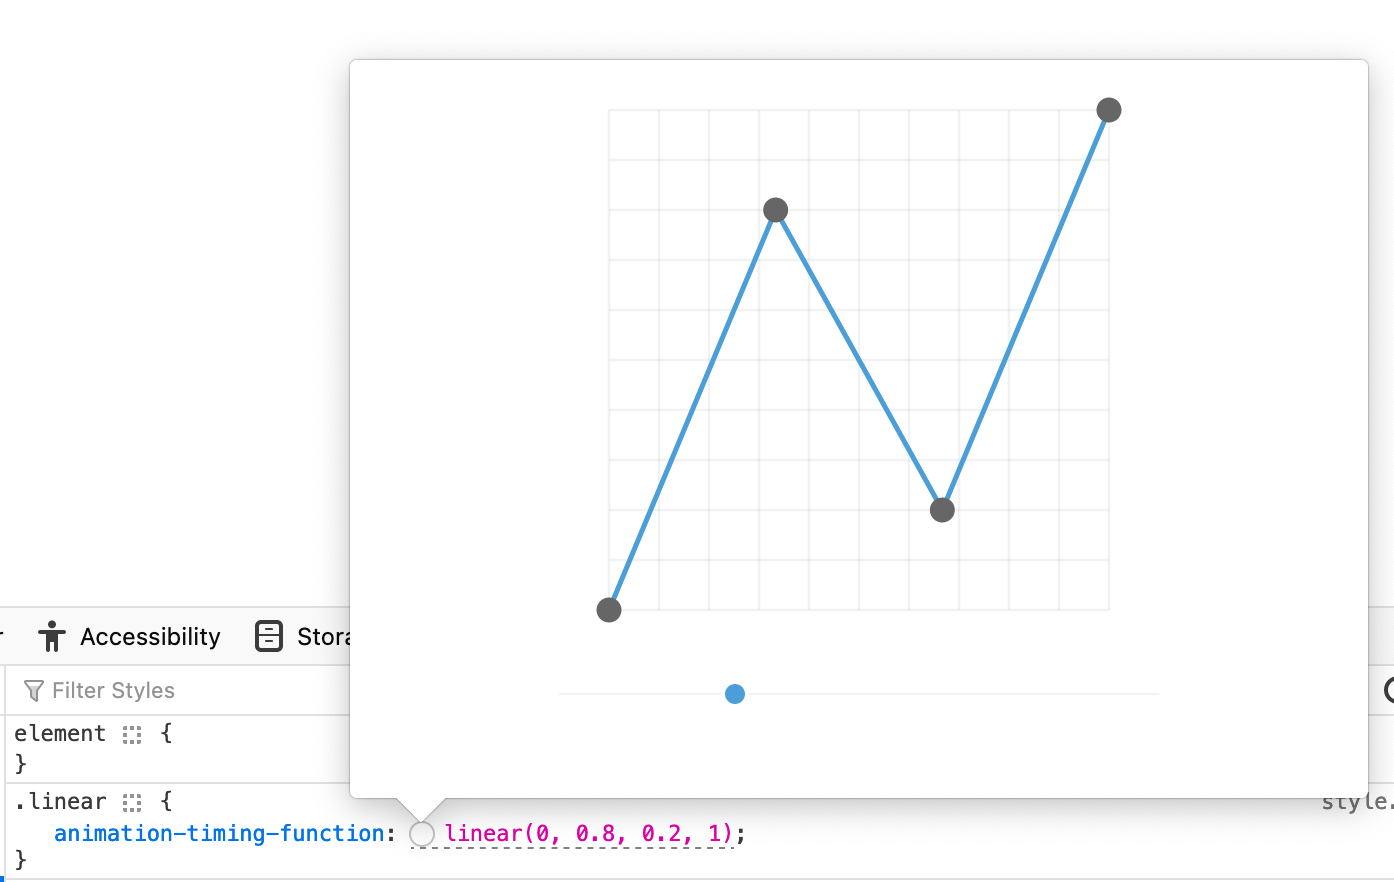 Image of a line graph that is displayed in Firefox devtools and can be interacted with for modifying the linear timing function for animations